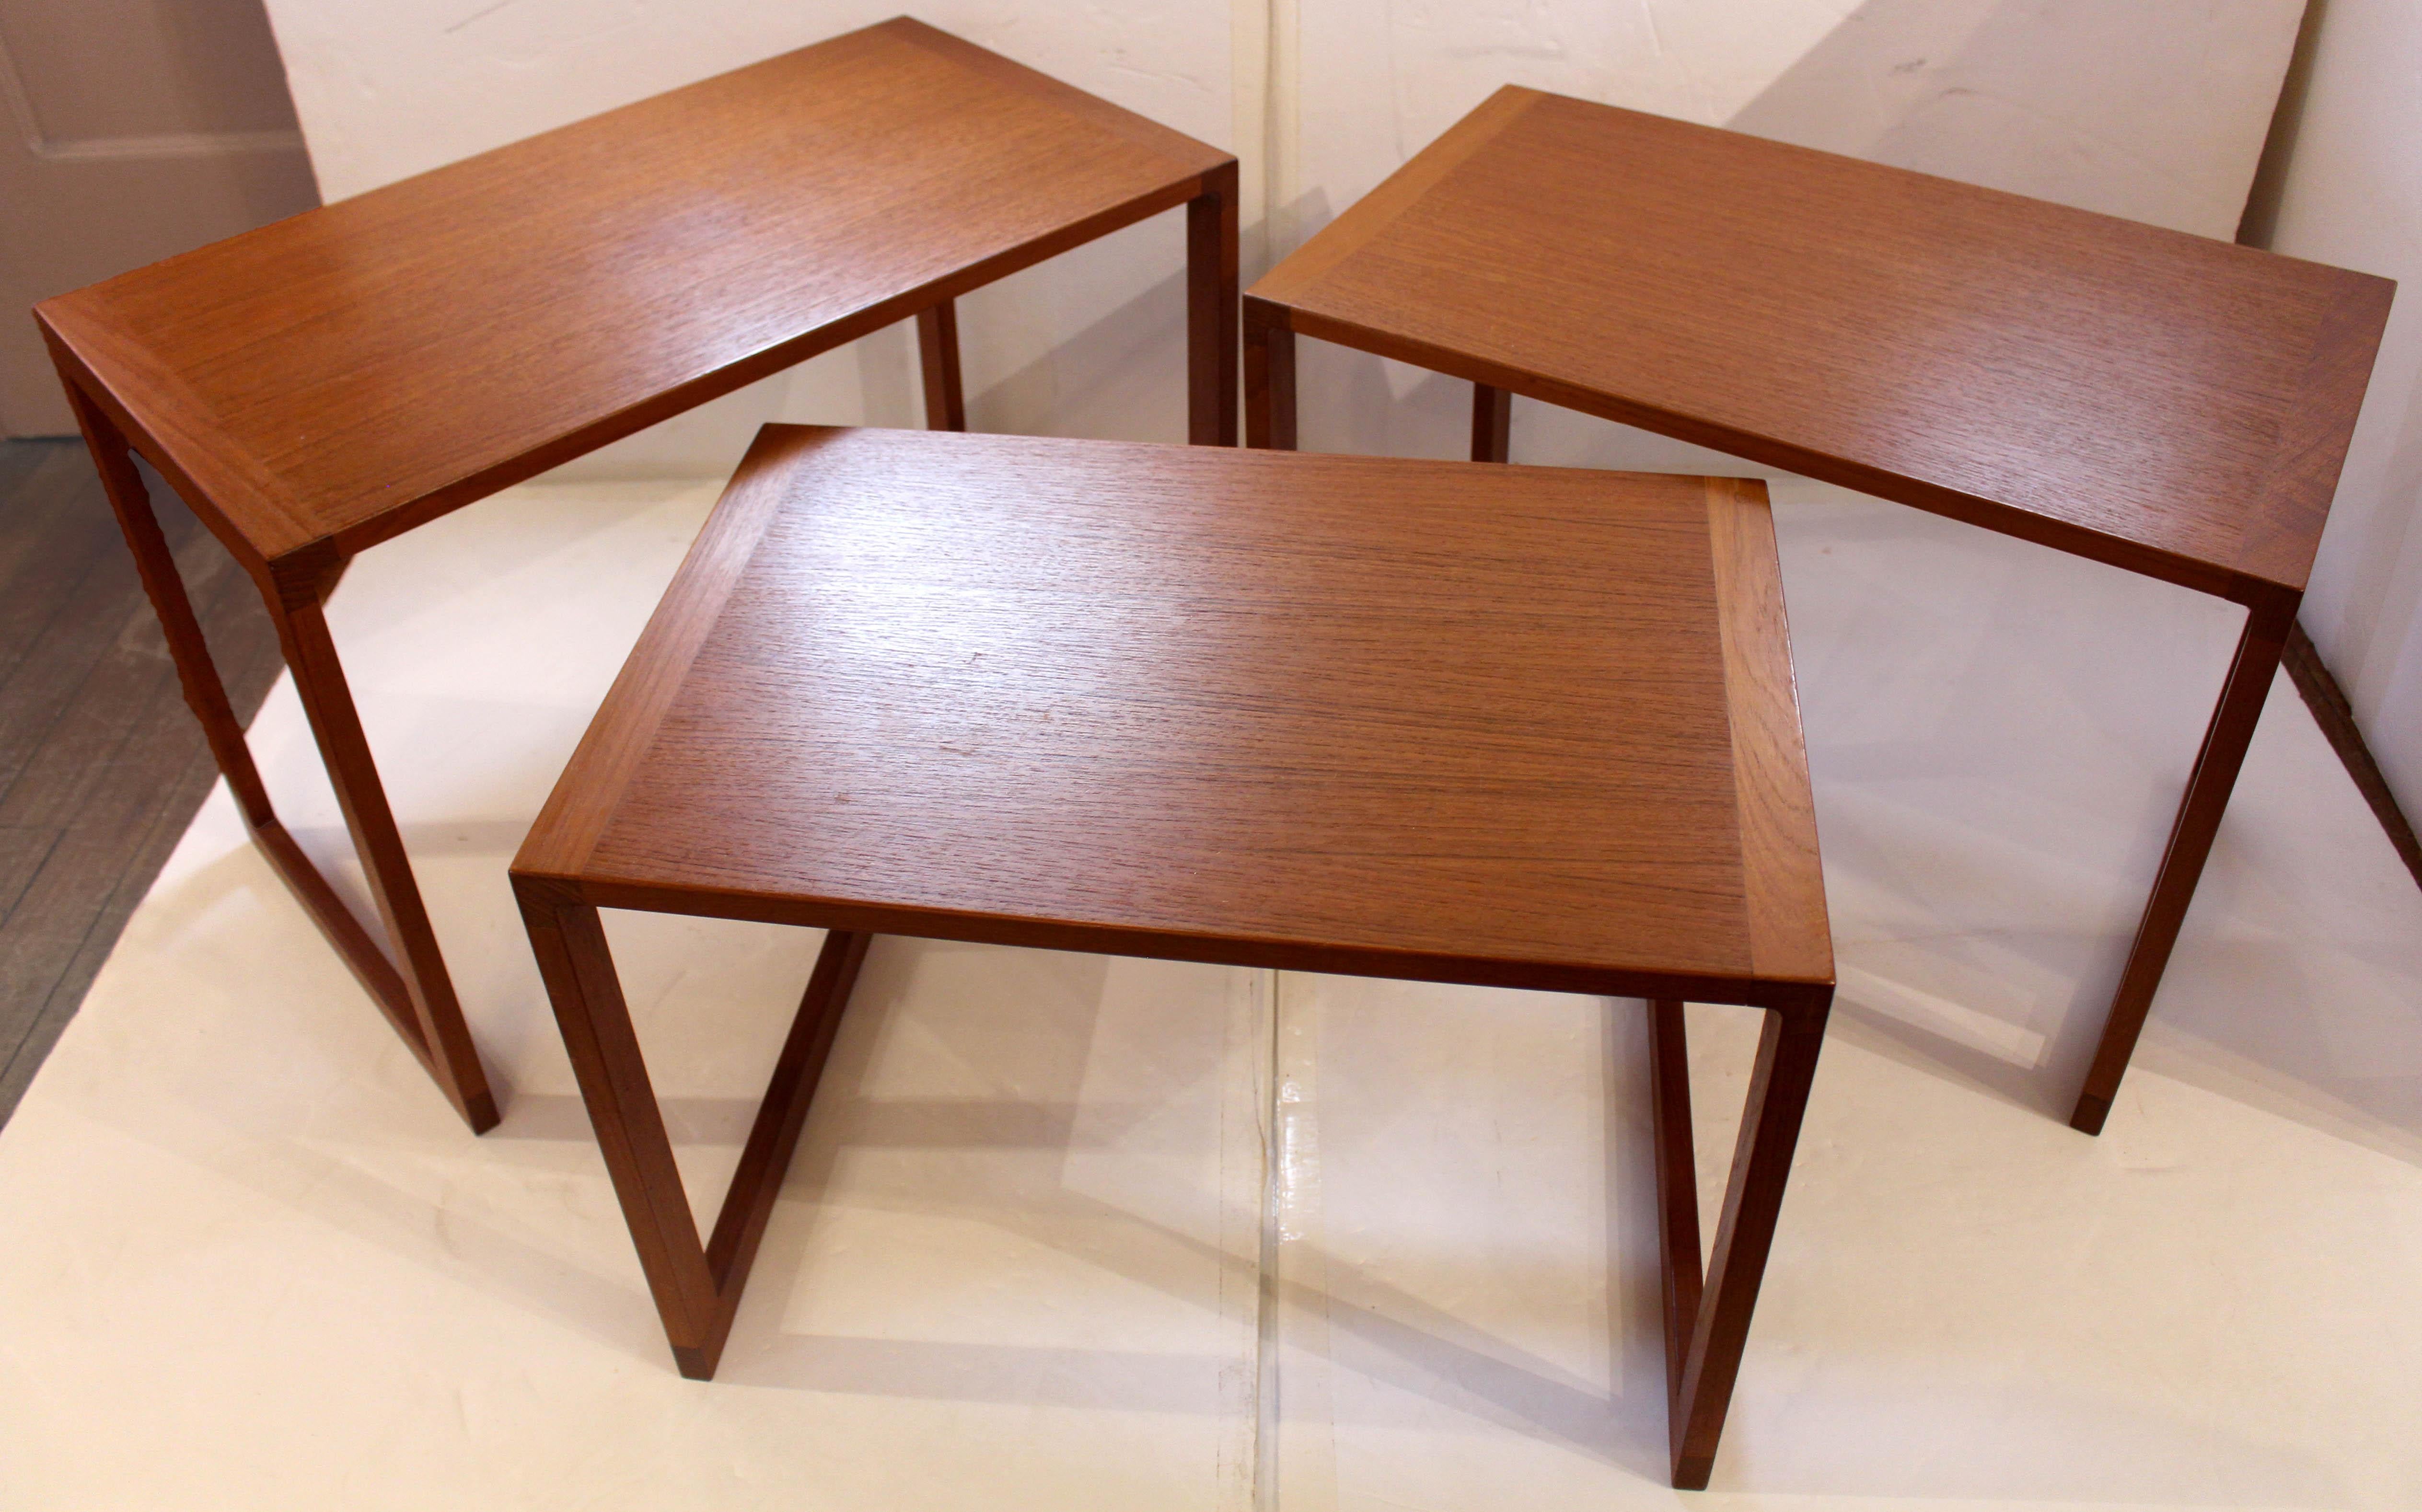 1960-70s Mid Century Modern set of three teak nesting tables, Danish. Simple, architectural form. Very good condition. Superb craftsmanship. Large: 24 3/8